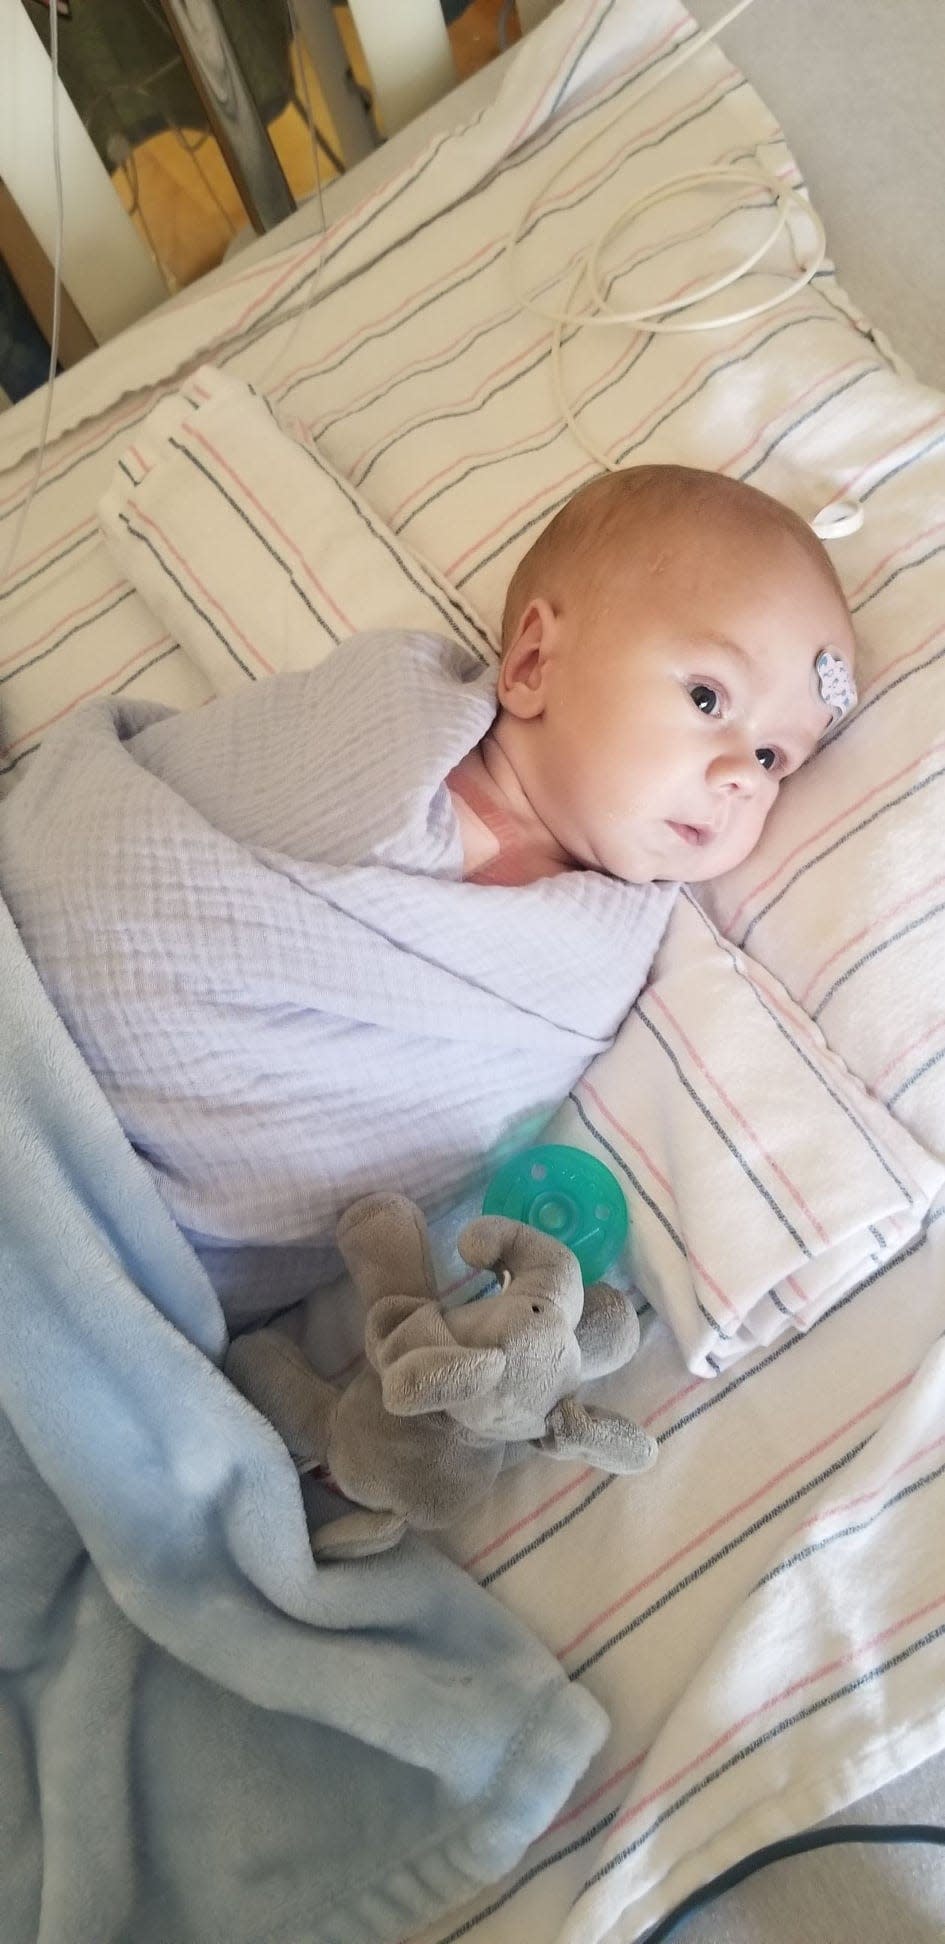 Benjamin Nelsen, born in Tallahassee in August, is awaiting a heart transplant at Shands hospital in Gainesville.